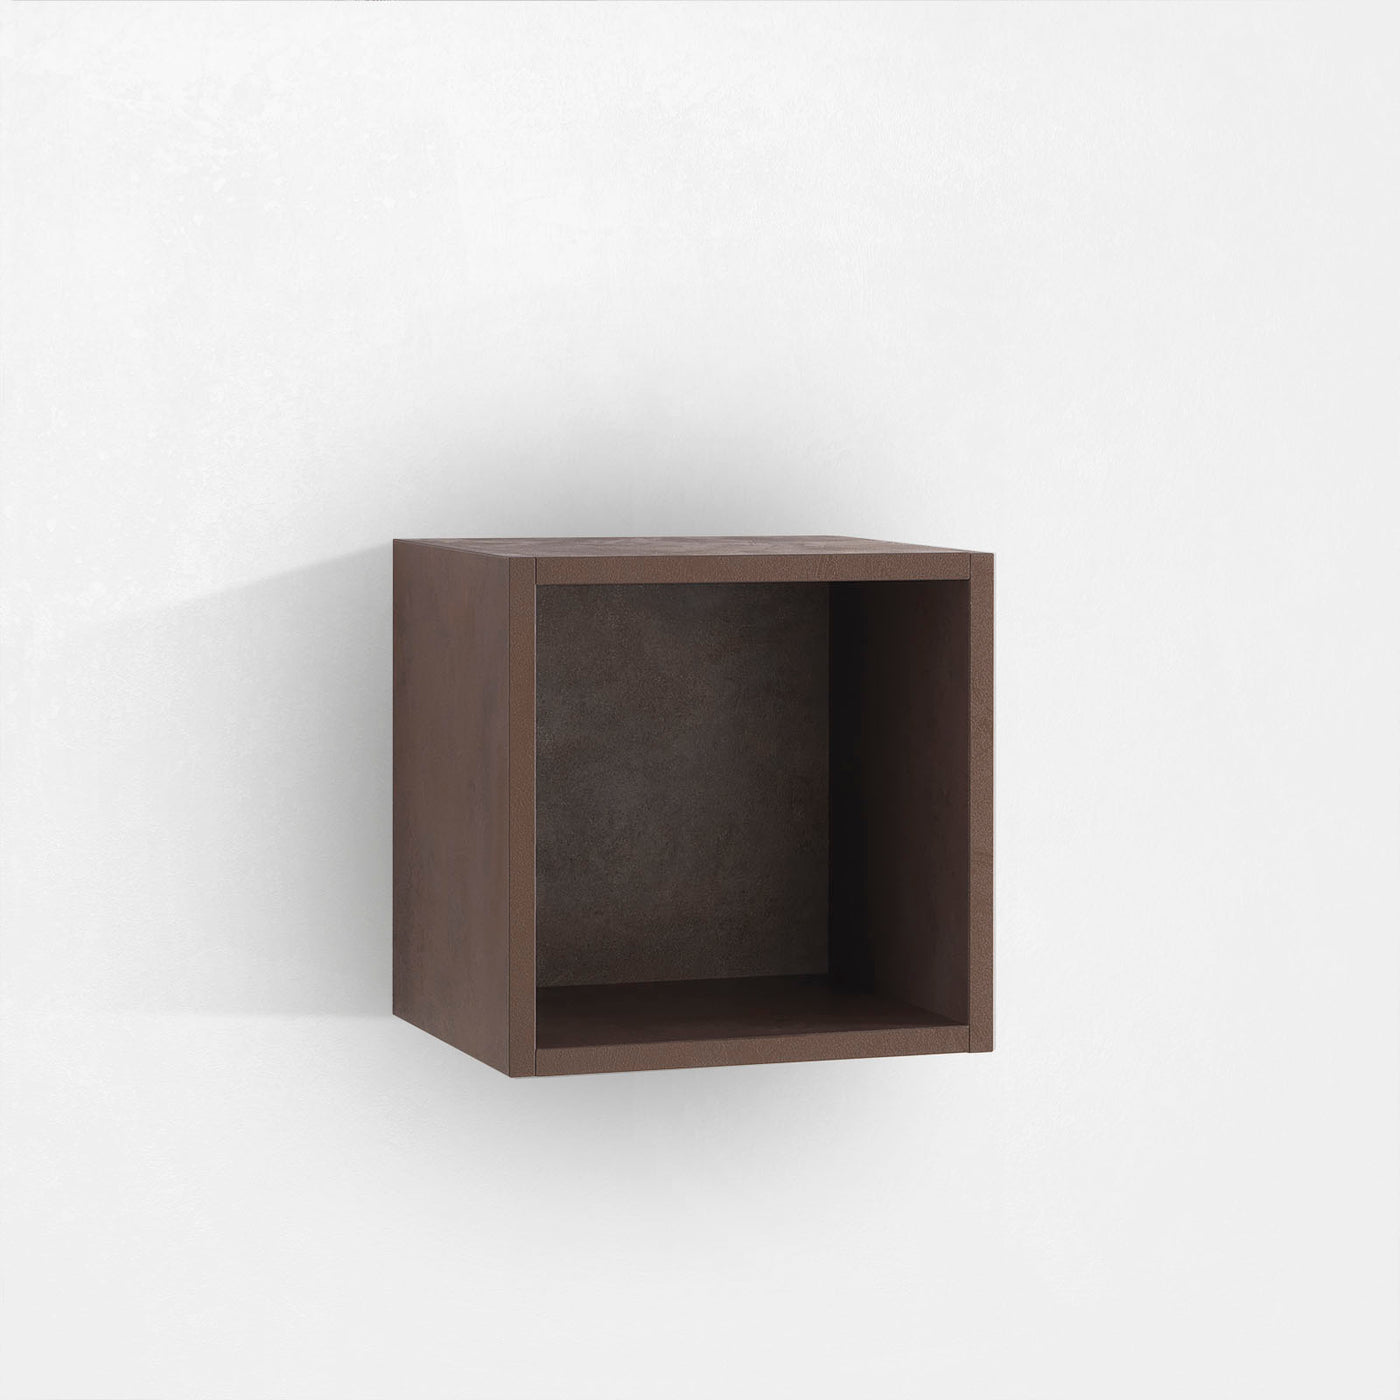 Stone brown OSLO wall unit with open compartment